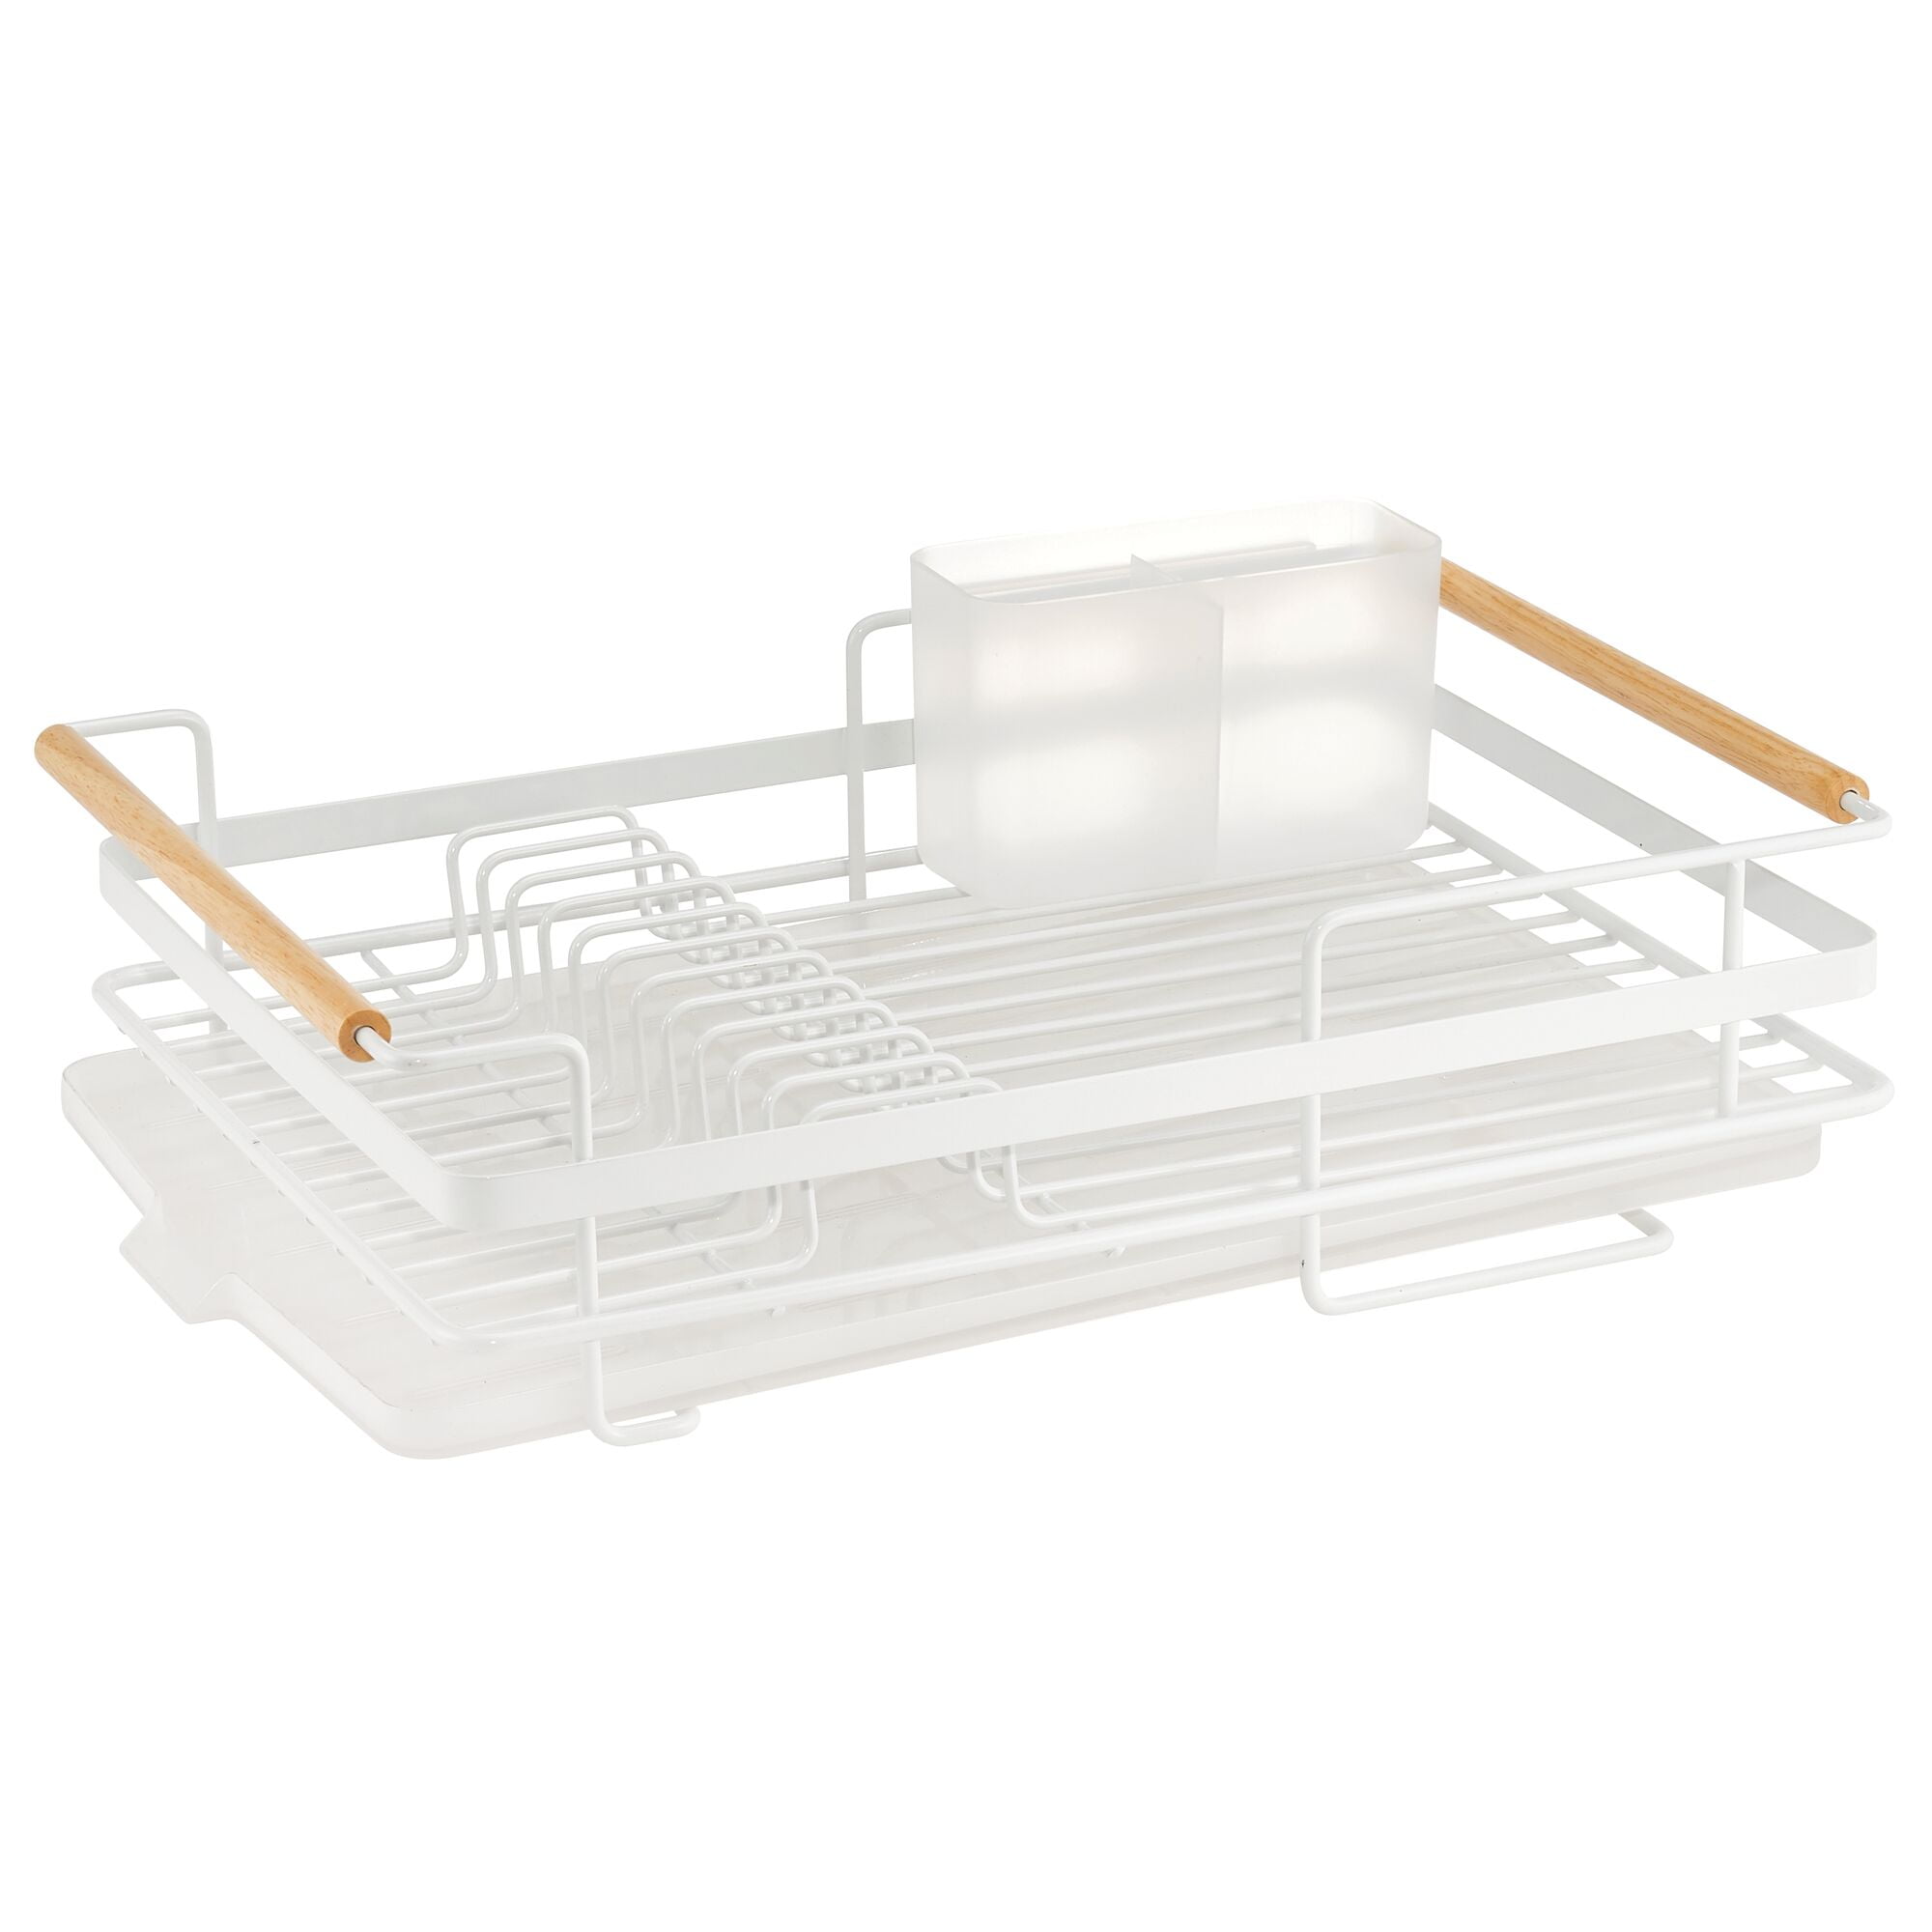  mDesign Alloy Steel Sink Dish Drying Rack Holder w/Plastic  Swivel Spout Drainboard Tray - Dish Rack/Dish Drainer Storage Organizer for  Kitchen Counter - Concerto Collection - Matte Satin/Frost